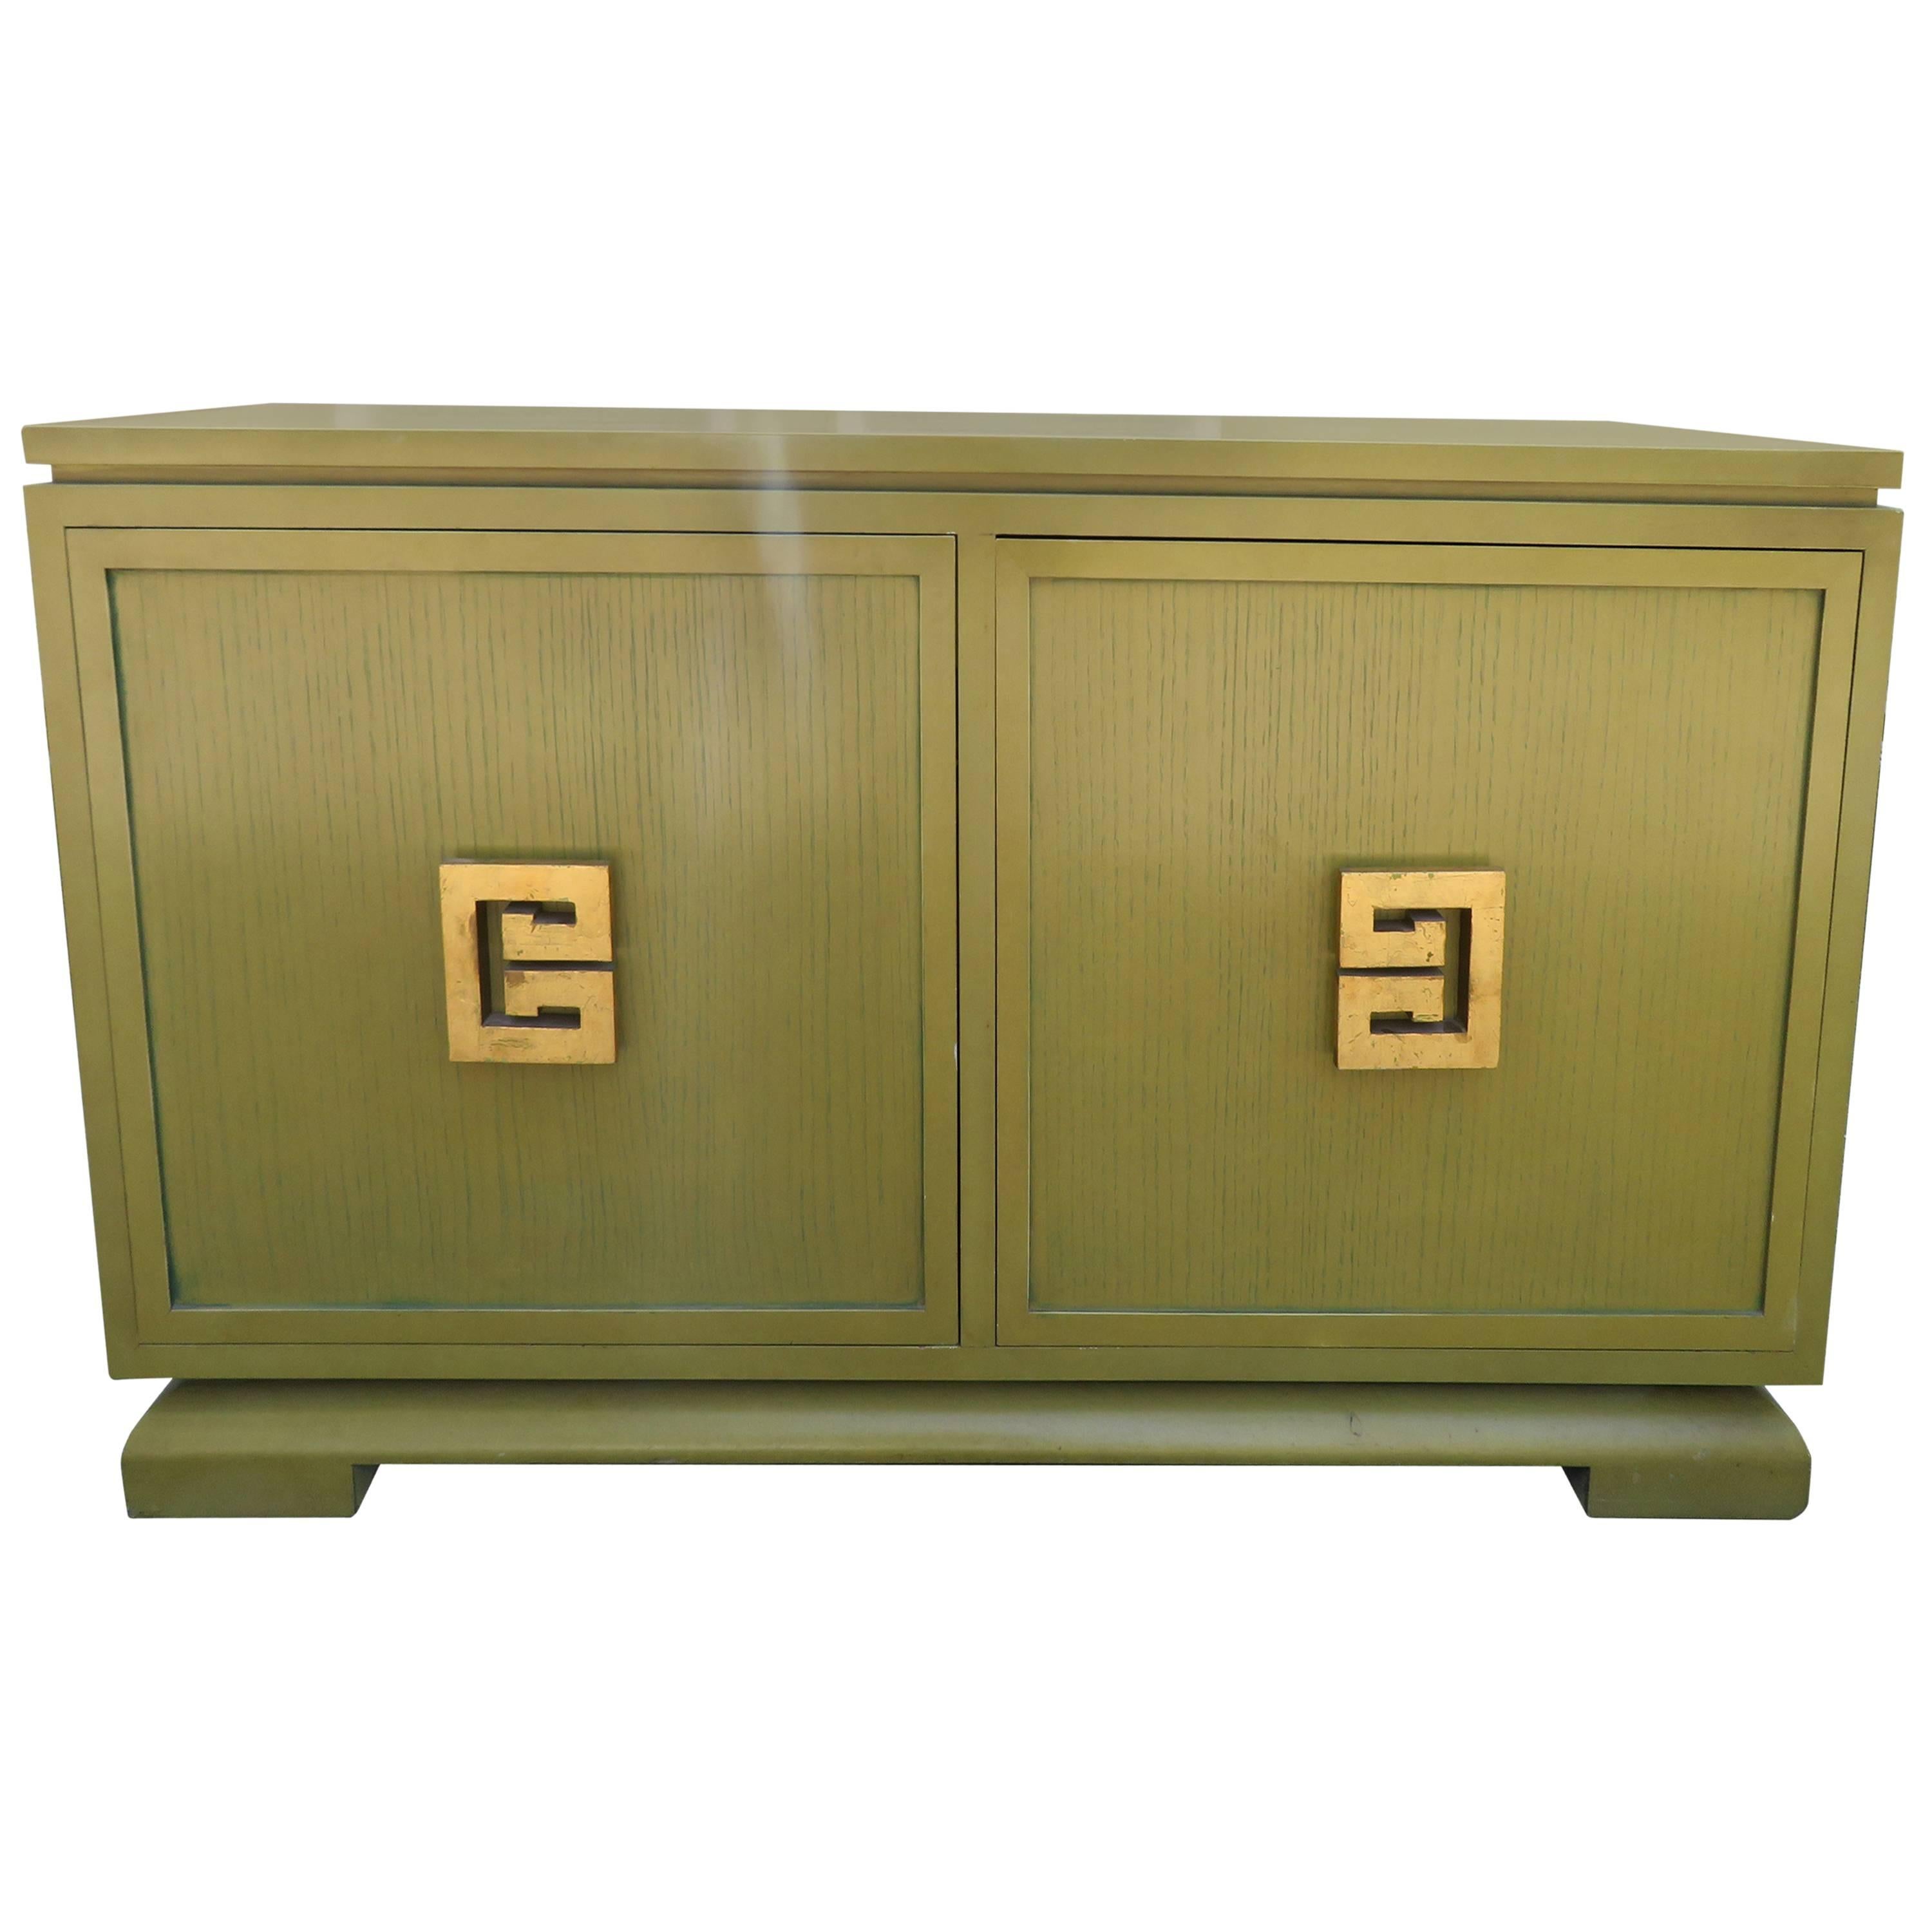 Handsome James Mont Style Asian Buffet Credenza Mid-Century Modern